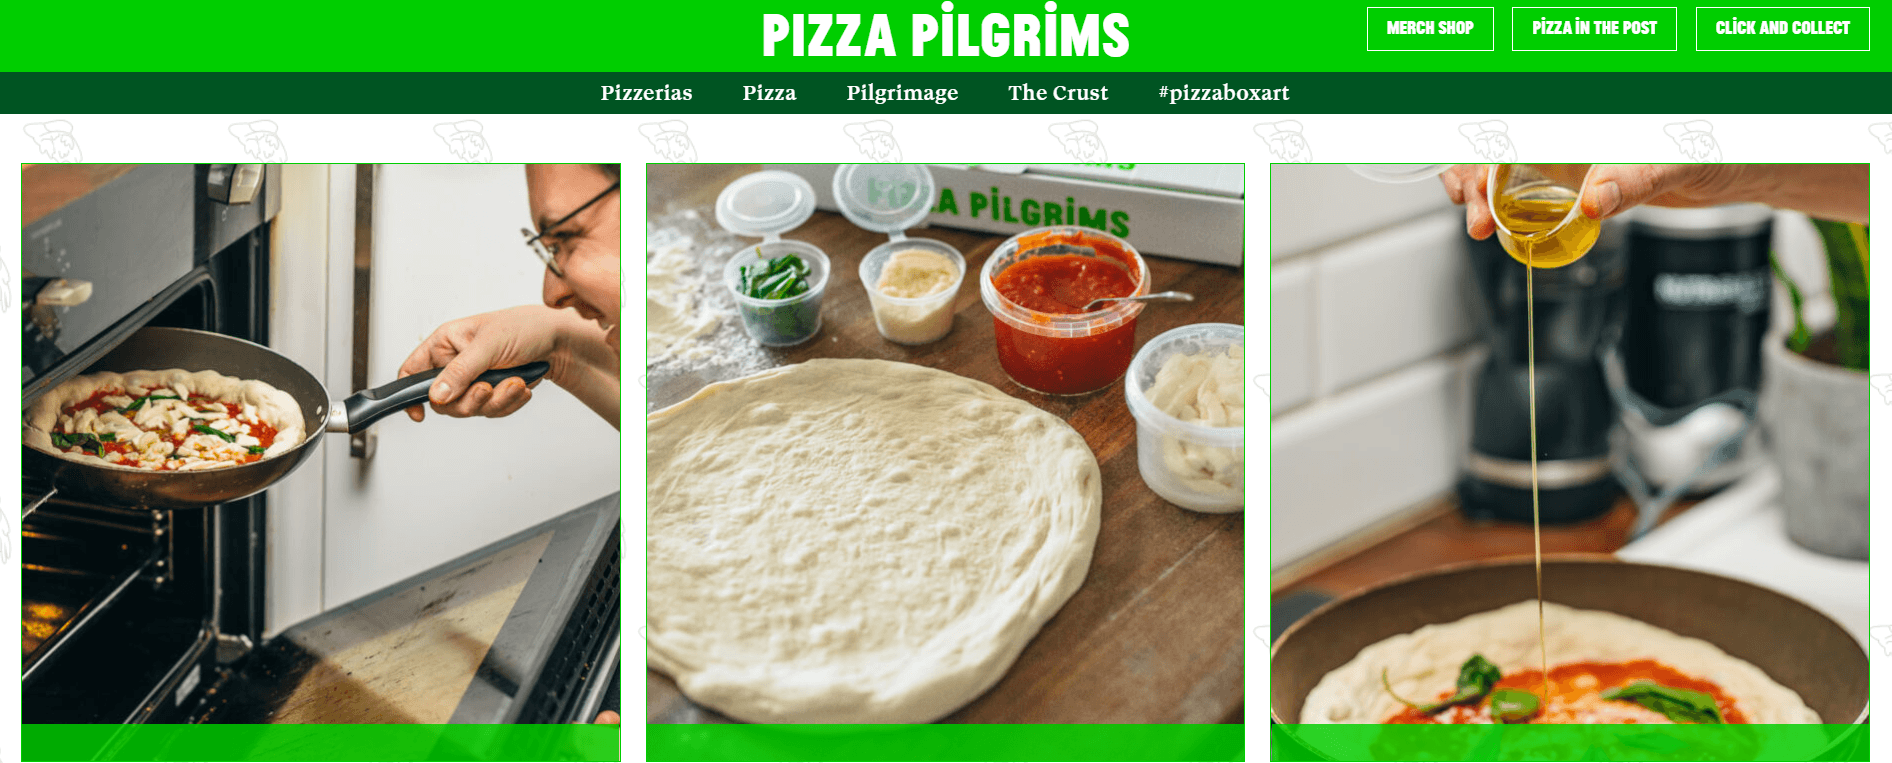 Pizza Pilgrims started a pizza in the post scheme over lockdown